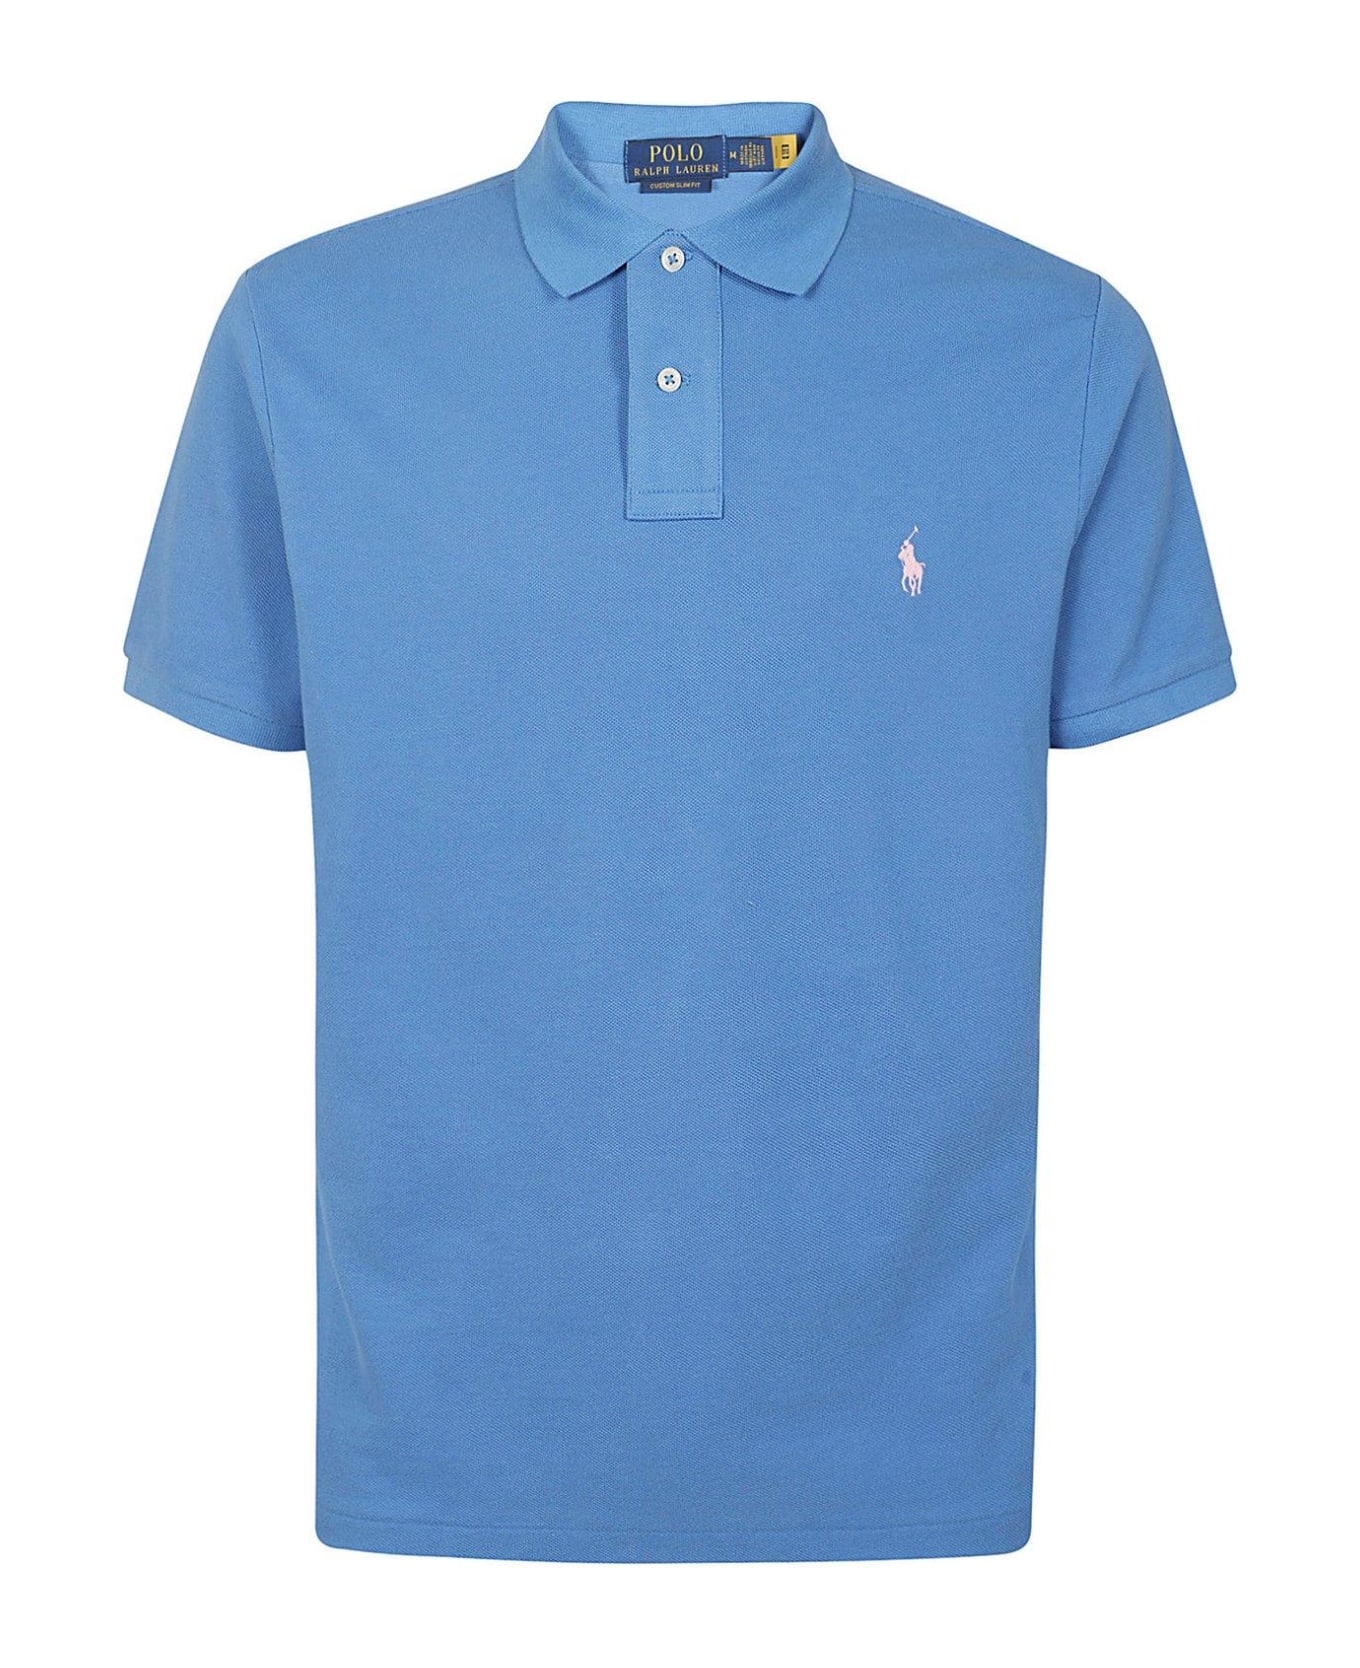 Polo Ralph Lauren "pony Embroidered Polo Shirt" - Blue